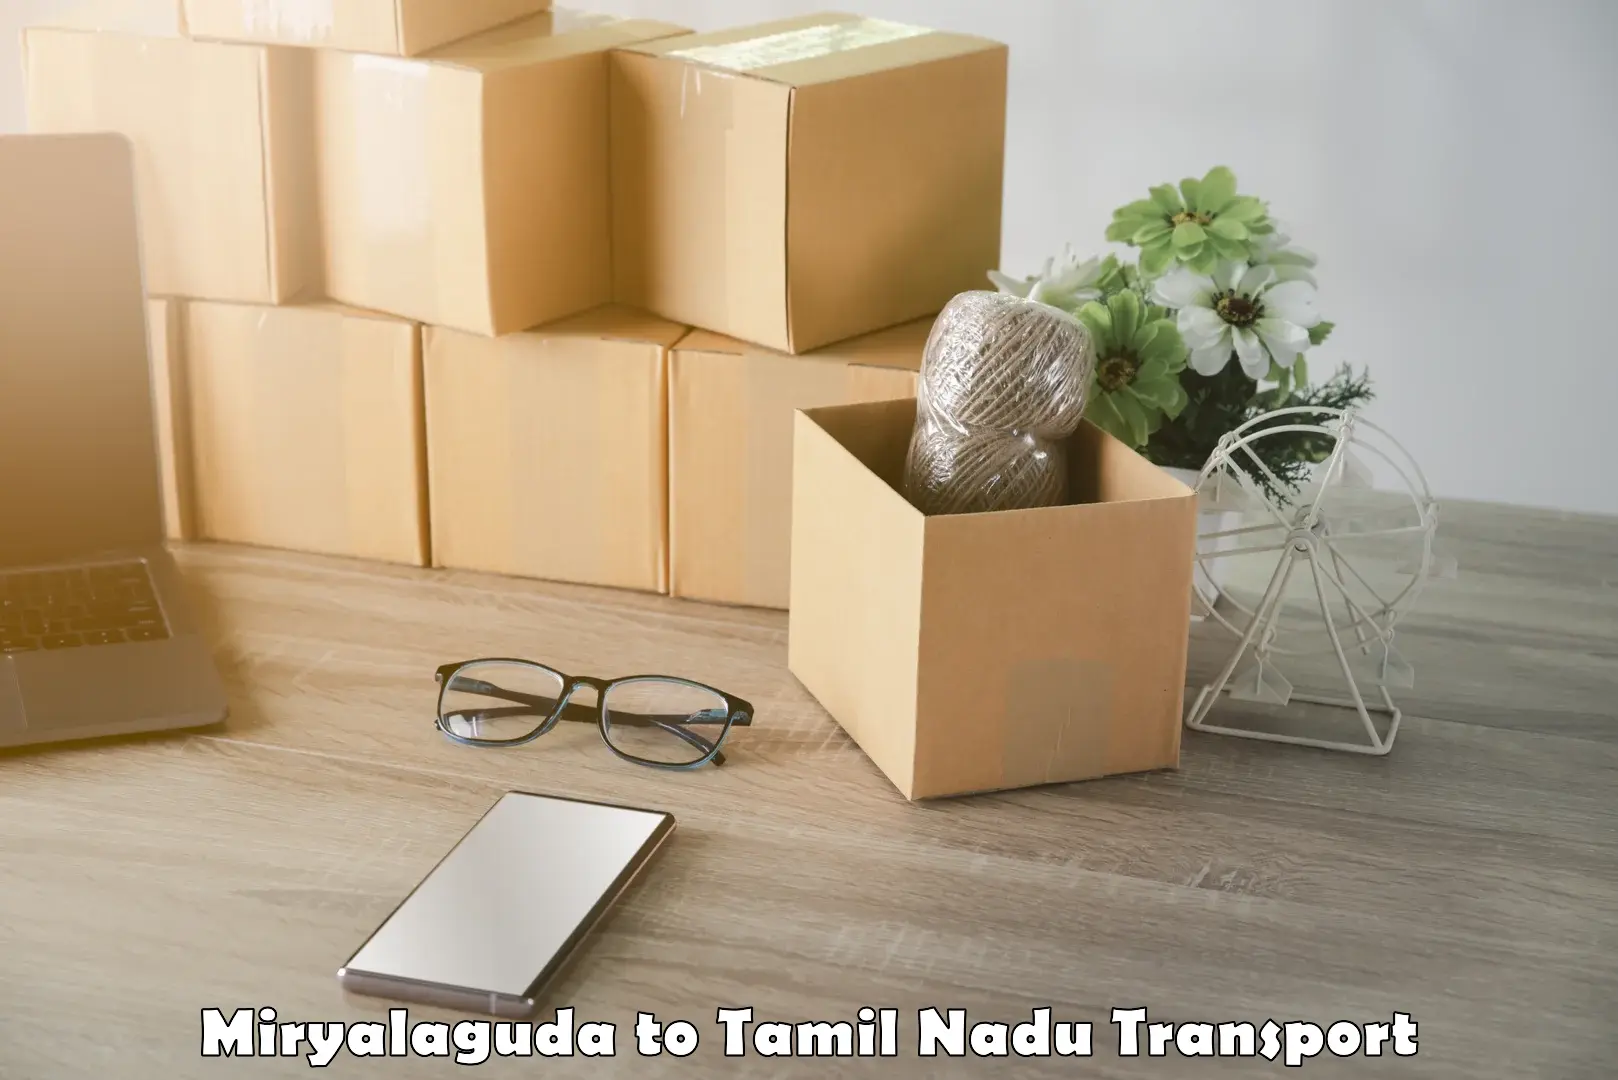 Nationwide transport services Miryalaguda to Shanmugha Arts Science Technology and Research Academy Thanjavur